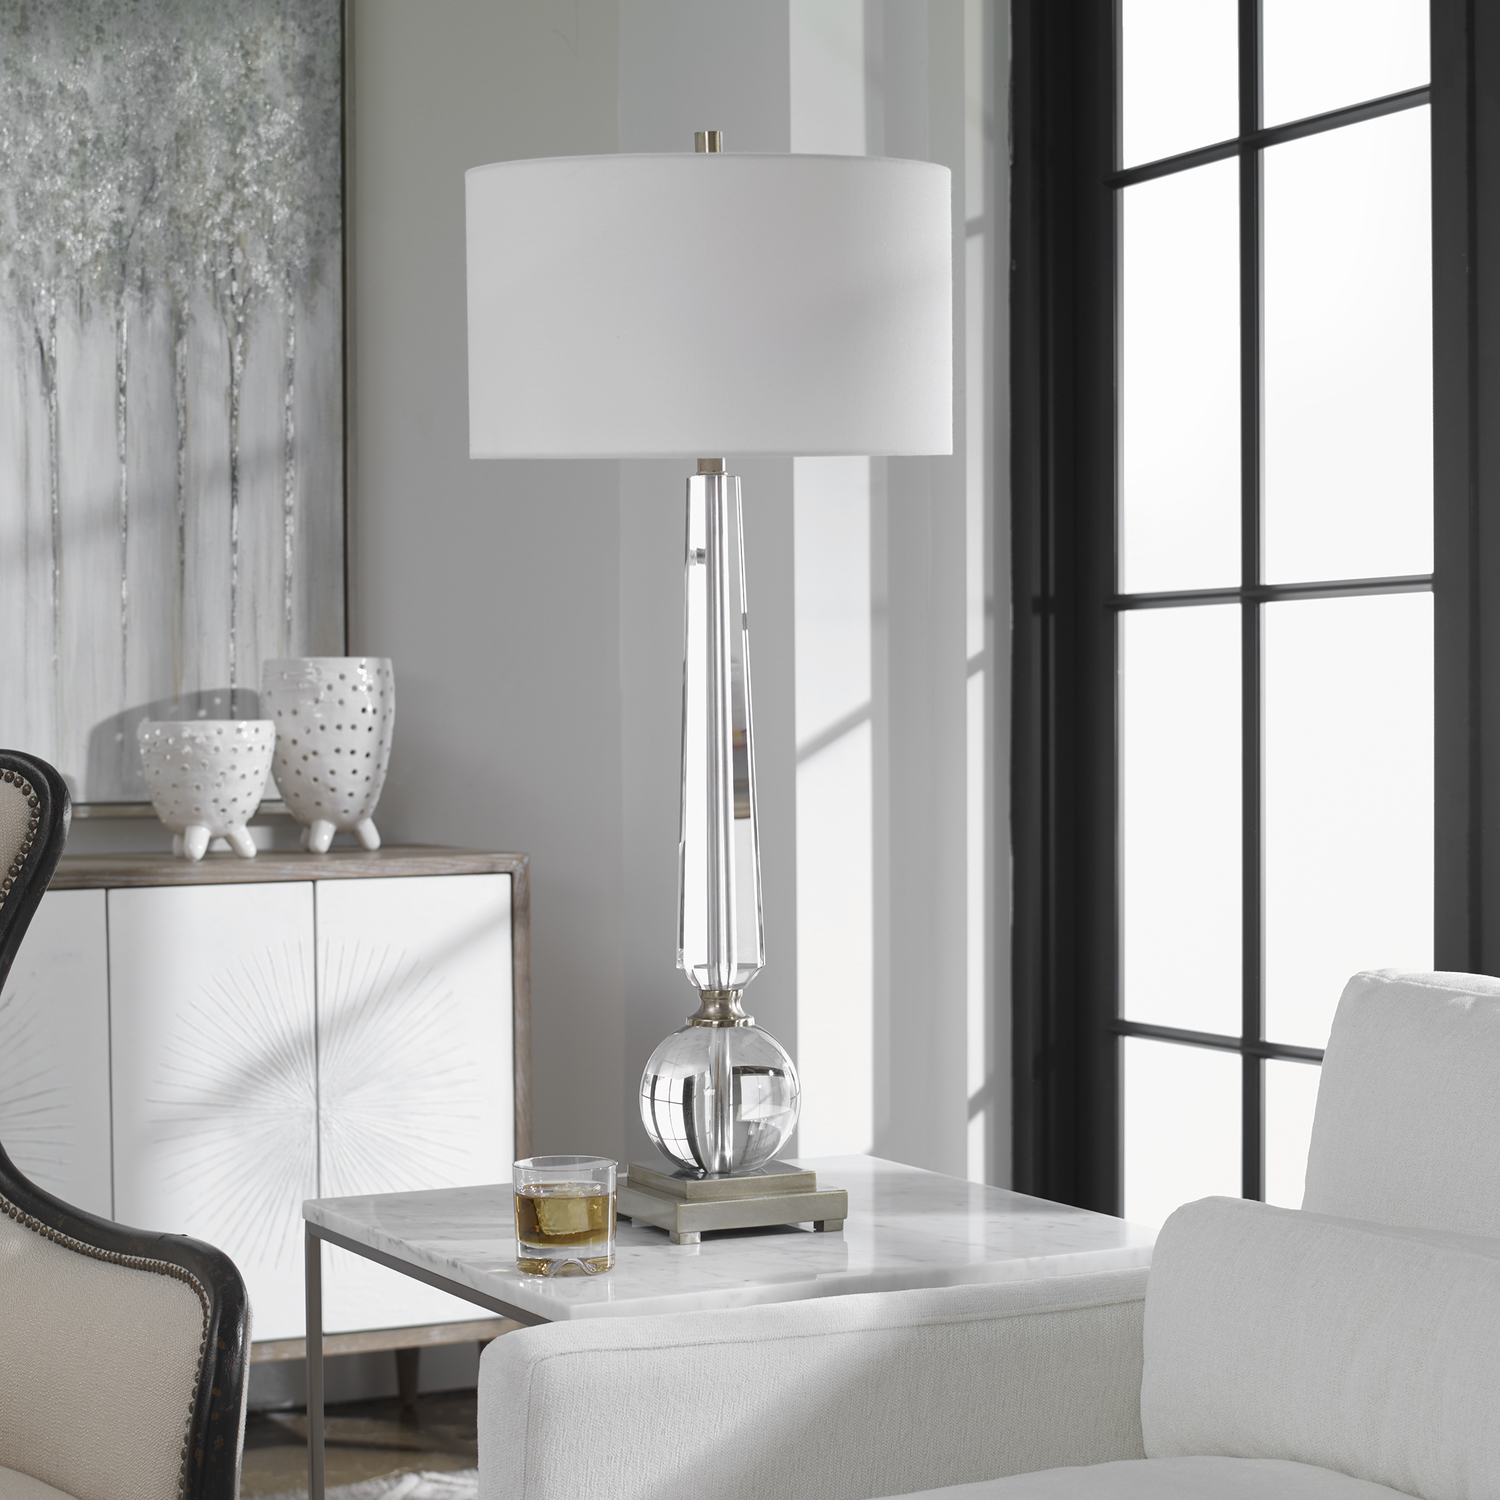 modern glass lamp shades Uttermost Crystal Lamp This Elegant Lamp Features A Tapered Cut Crystal Column, Displayed With A Thick Crystal Sphere, Creating A Timeless Design Thats Paired With Brushed, Antiqued Nickel Plated Details For An Updated Appeal.